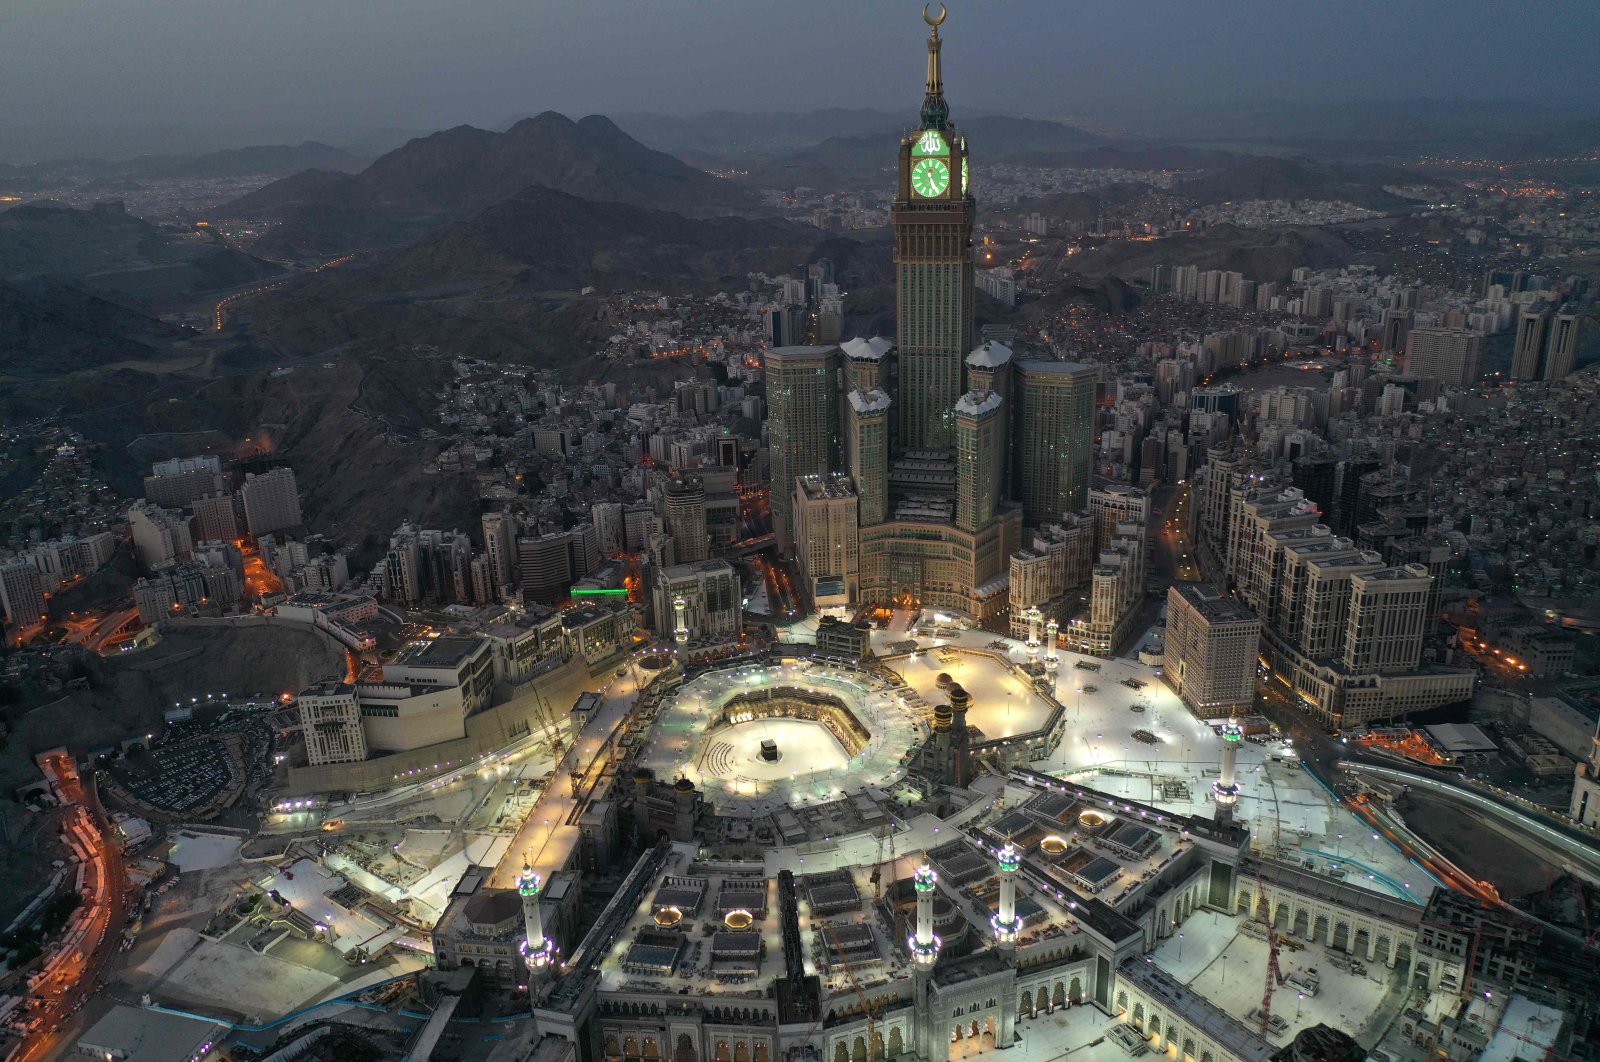 Mecca at night Photograph by Essam Al Hedek